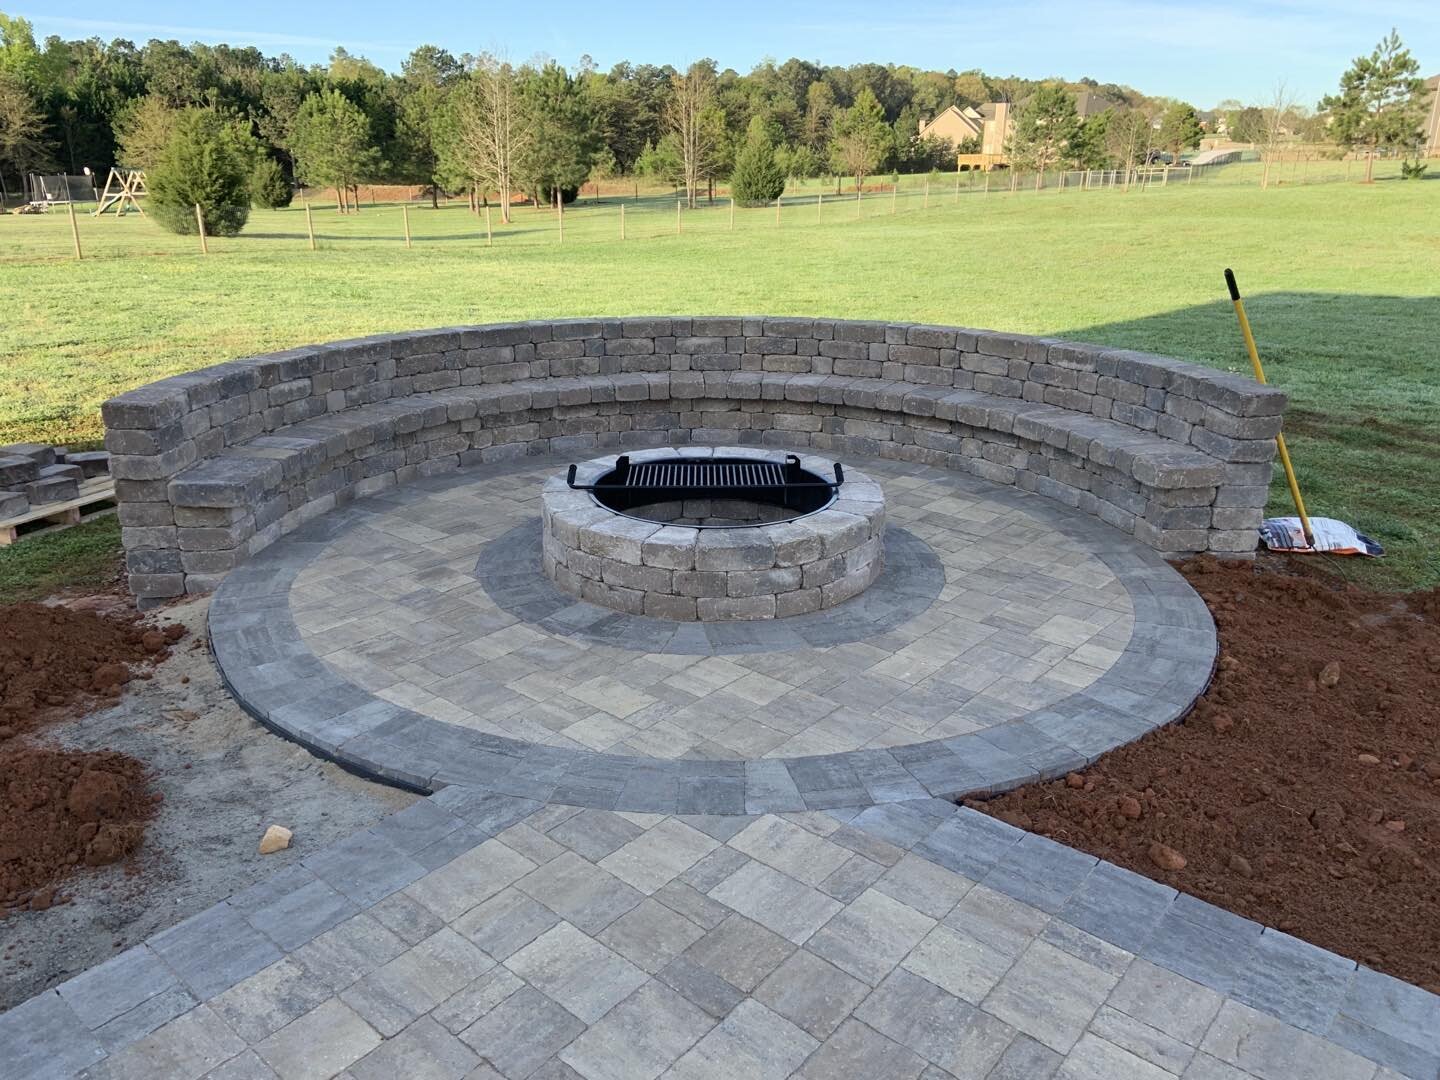 Contrast, texture and clean cuts! These clients are loving their patio 
#belgard #origins #lafitt #westonstone

@haley.browning